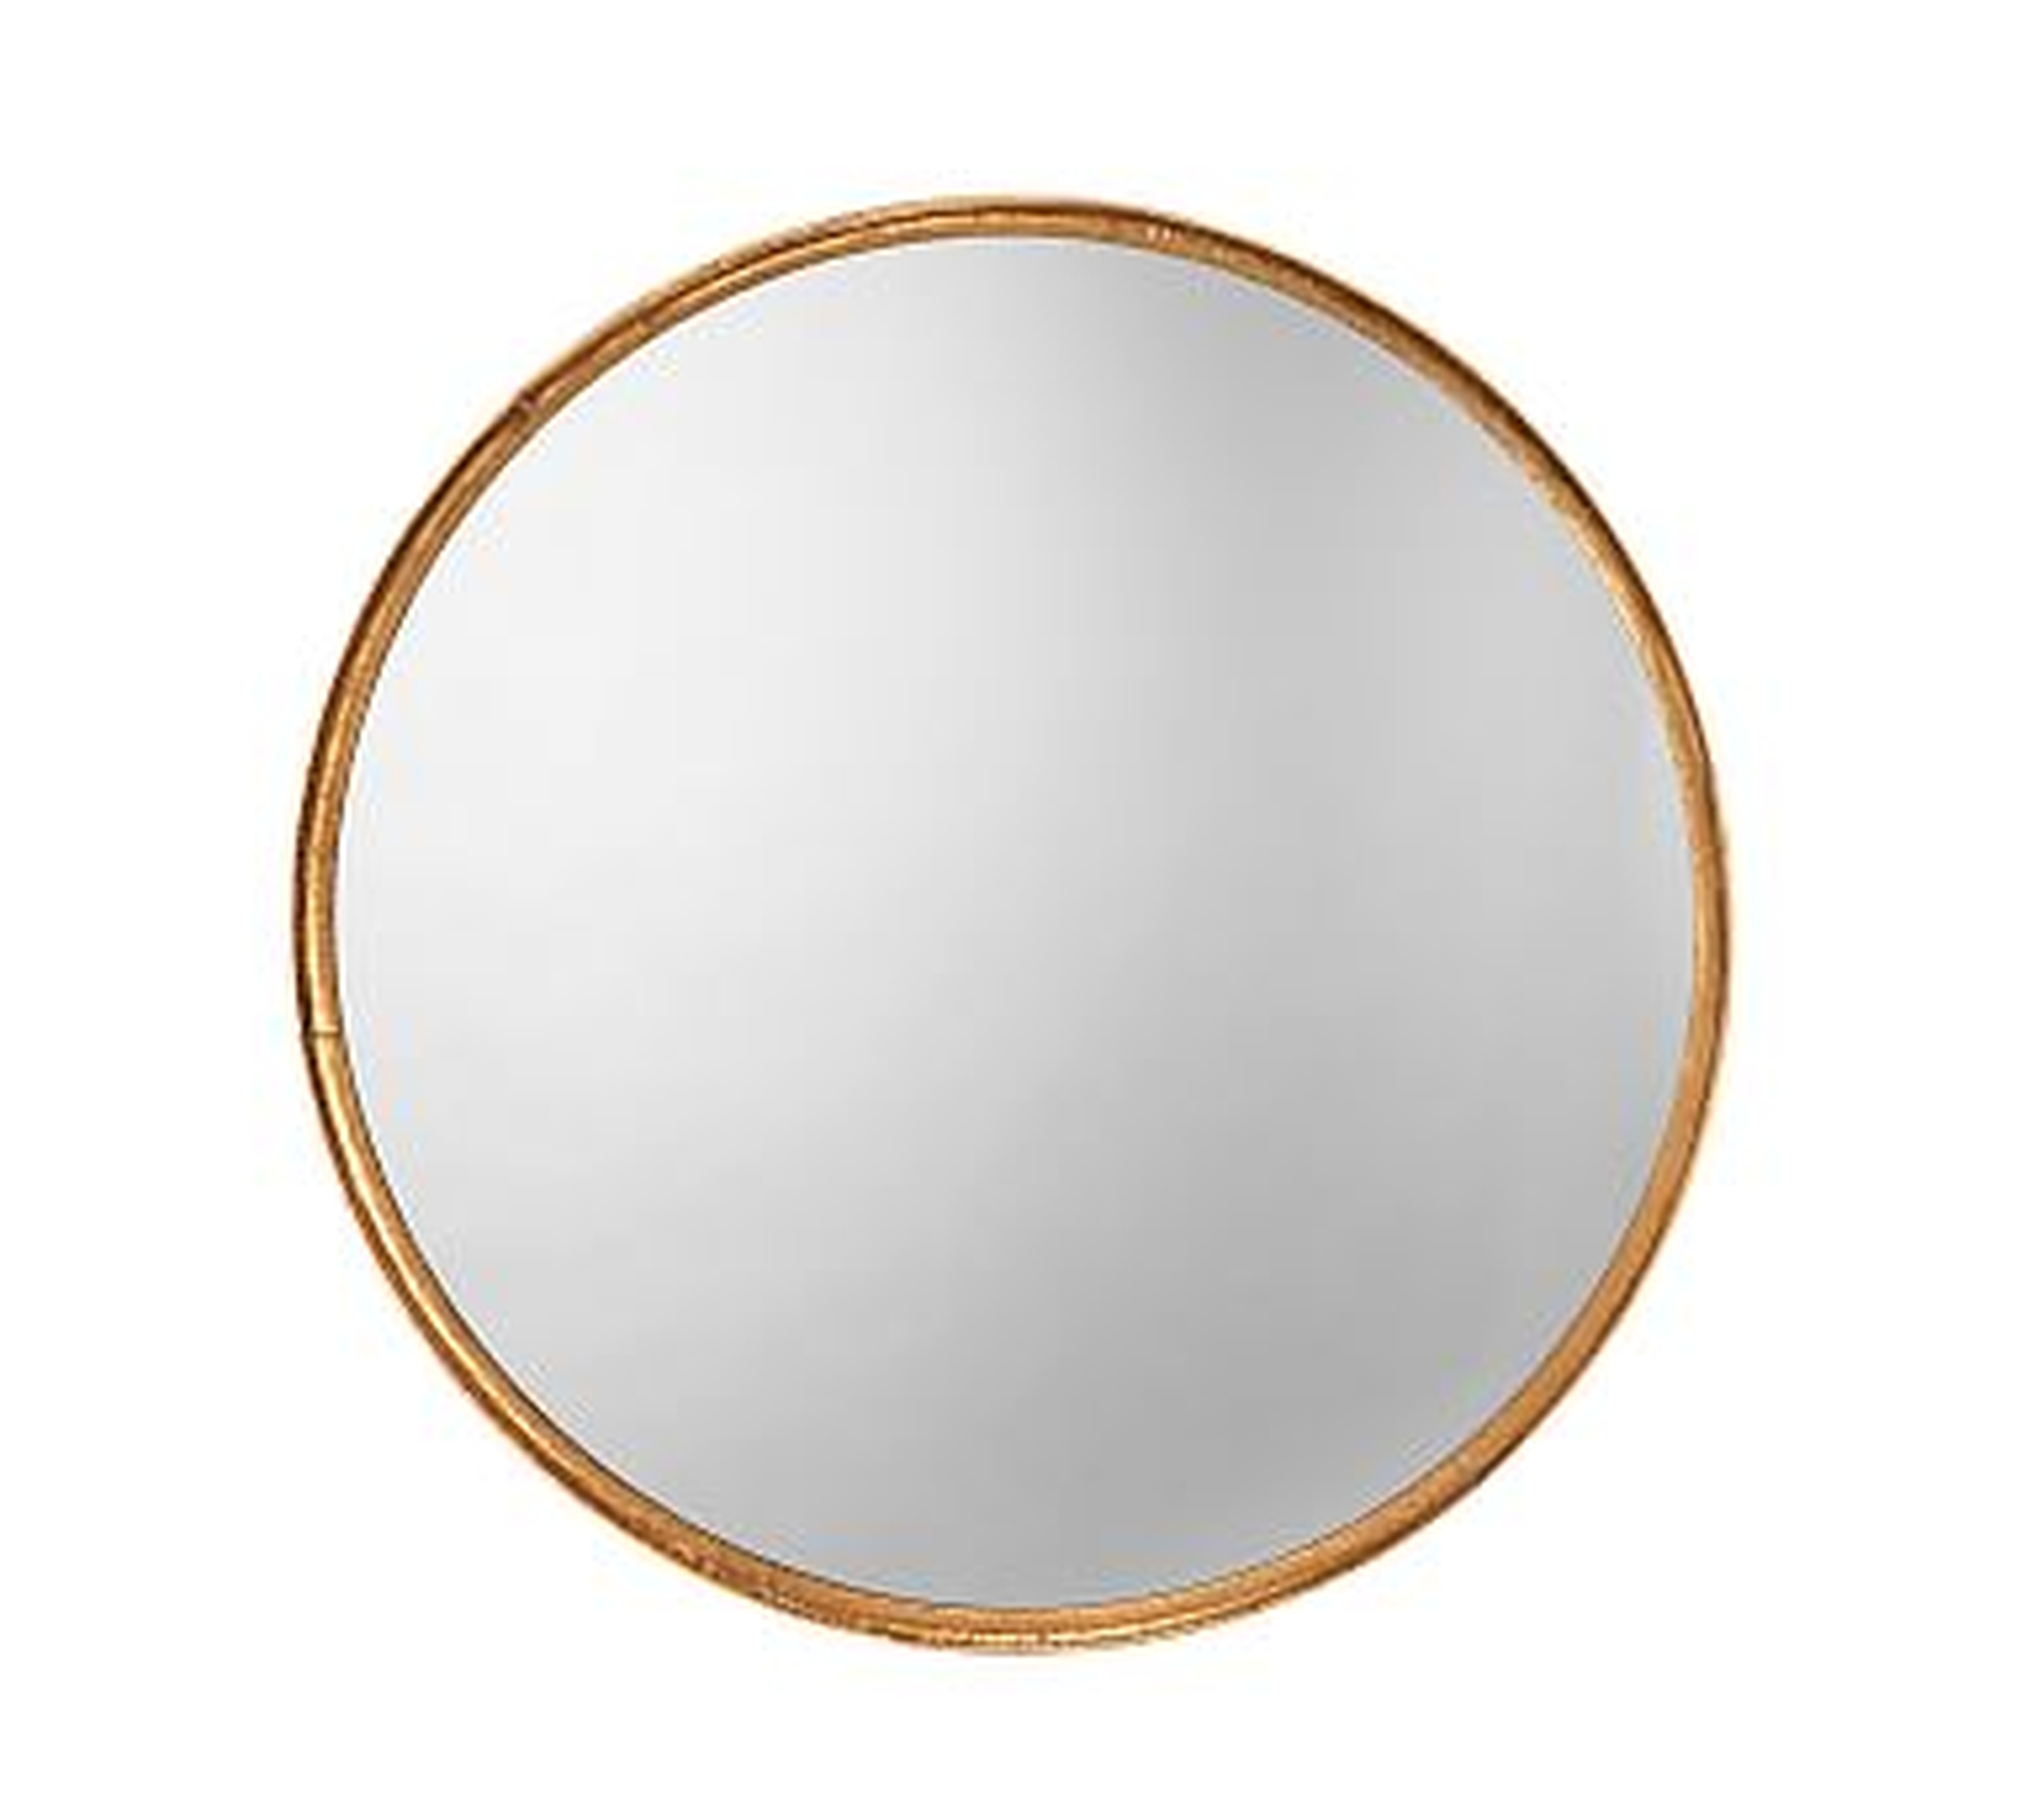 Refined Round Mirror, Gold, 36" - Pottery Barn